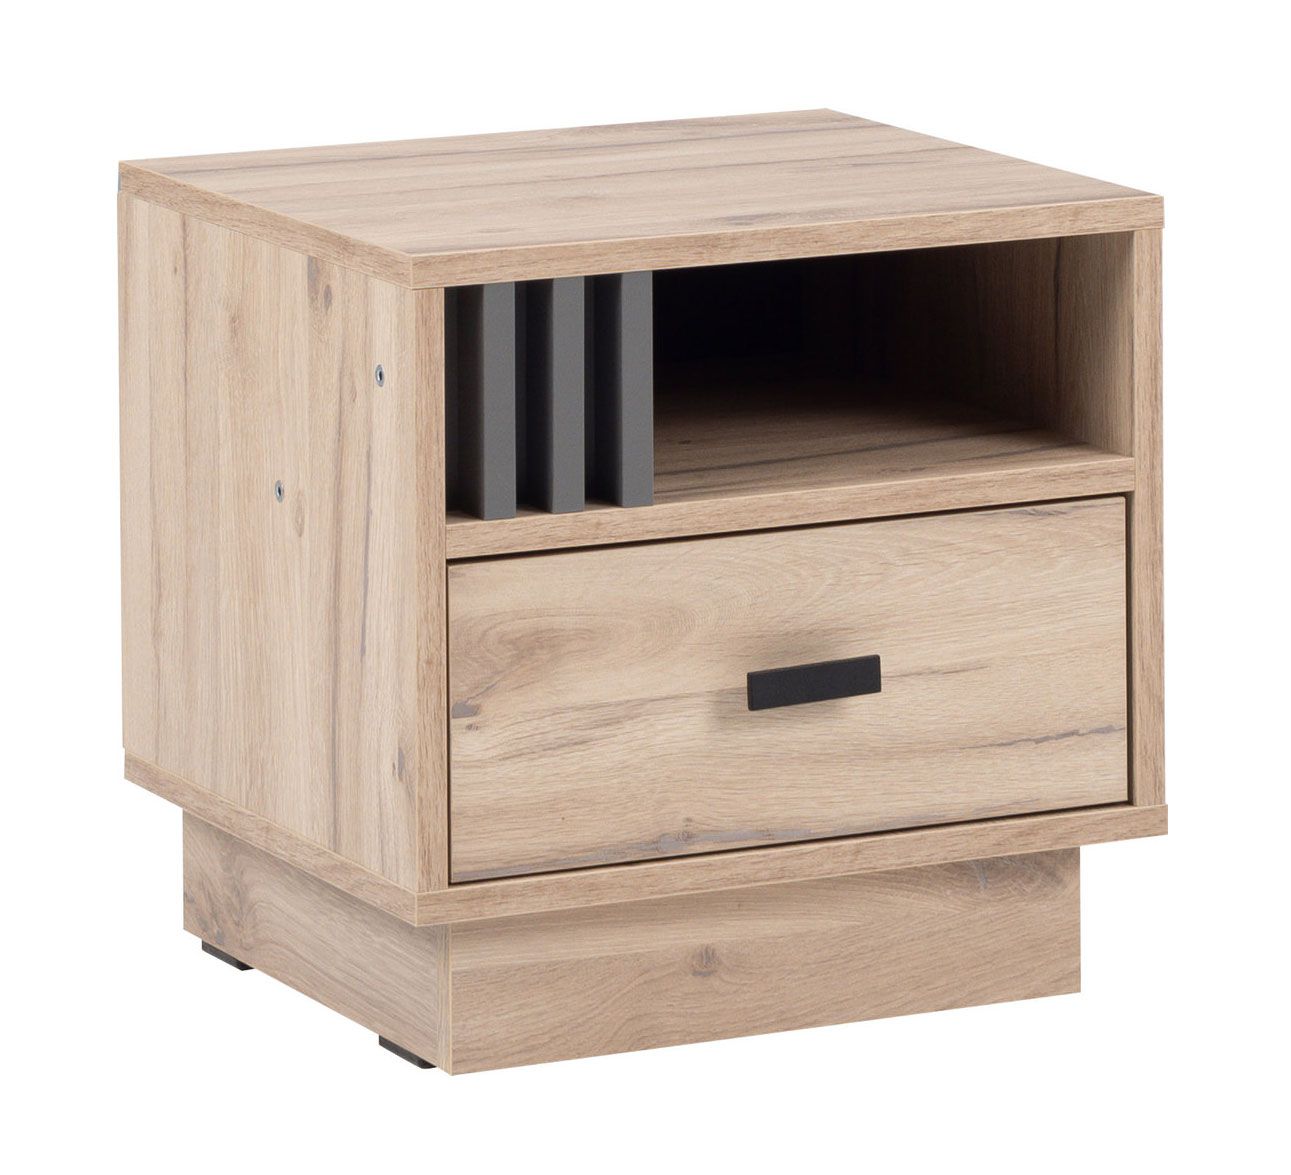 Bedside chest of drawers for bed extension left Niel 20, color: oak / anthracite - Dimensions: 40 x 40 x 36 cm (H x W x D)